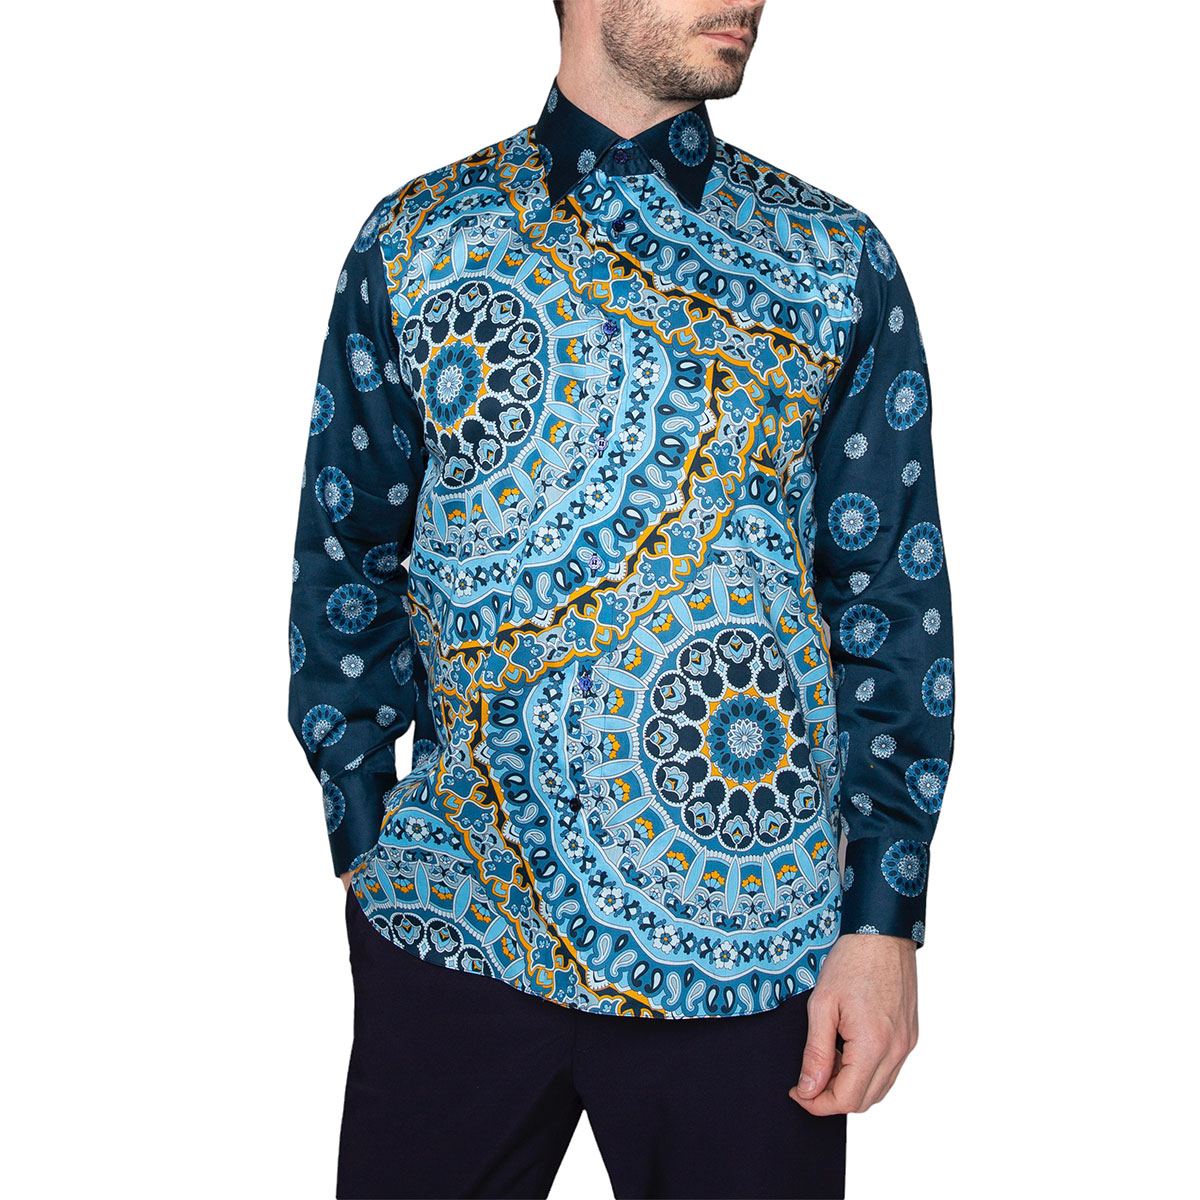 Customizable cotton shirt, long sleeves, giant medallions pattern ...